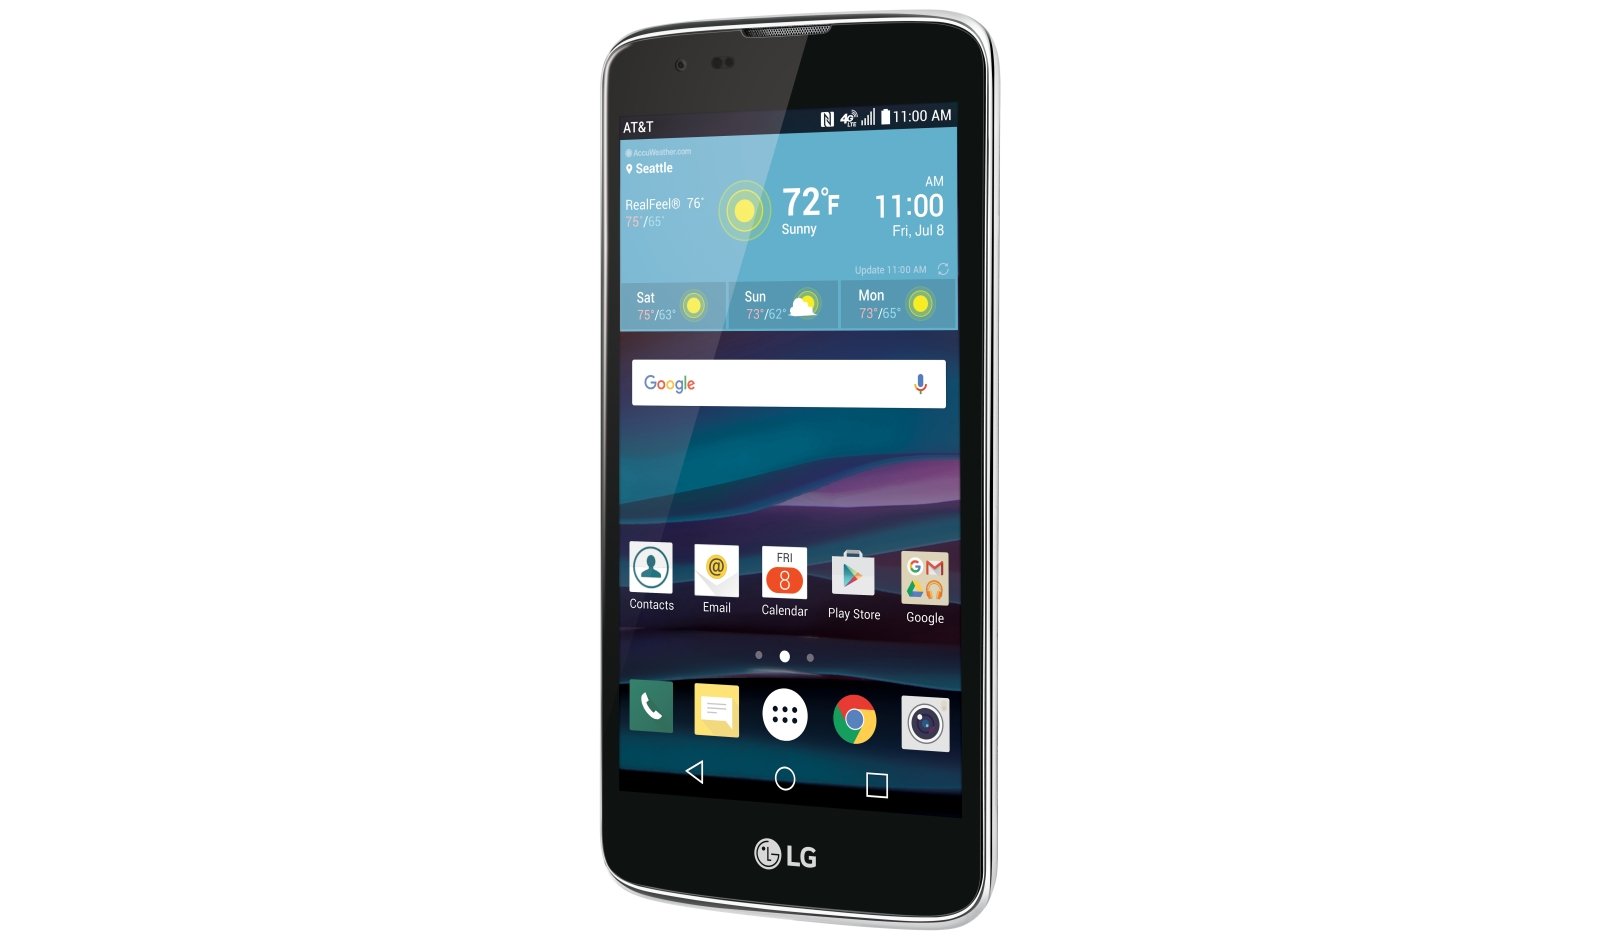 AT&T GoPhone LG Phoenix 2 Smartphone - 4GLTE 8GB Memory Prepaid No Contract Locked Cell Phone - Black